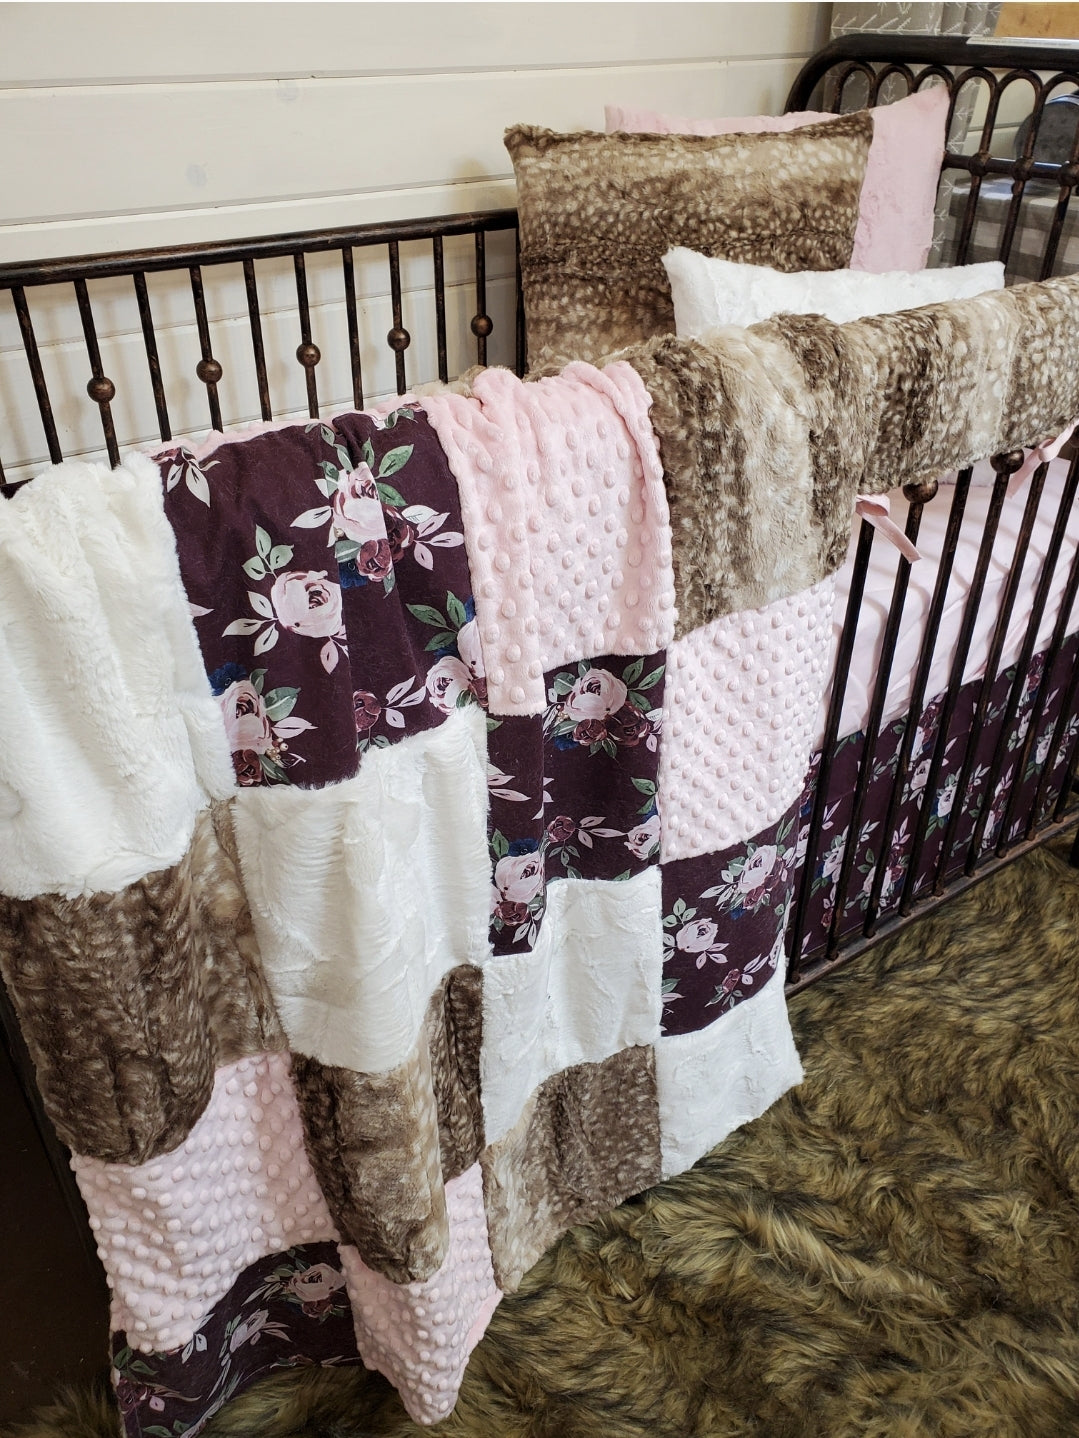 New Release Girl Crib Bedding- Maroon Floral and Fawn Minky Baby Bedding &amp; Nursery Collection - DBC Baby Bedding Co 